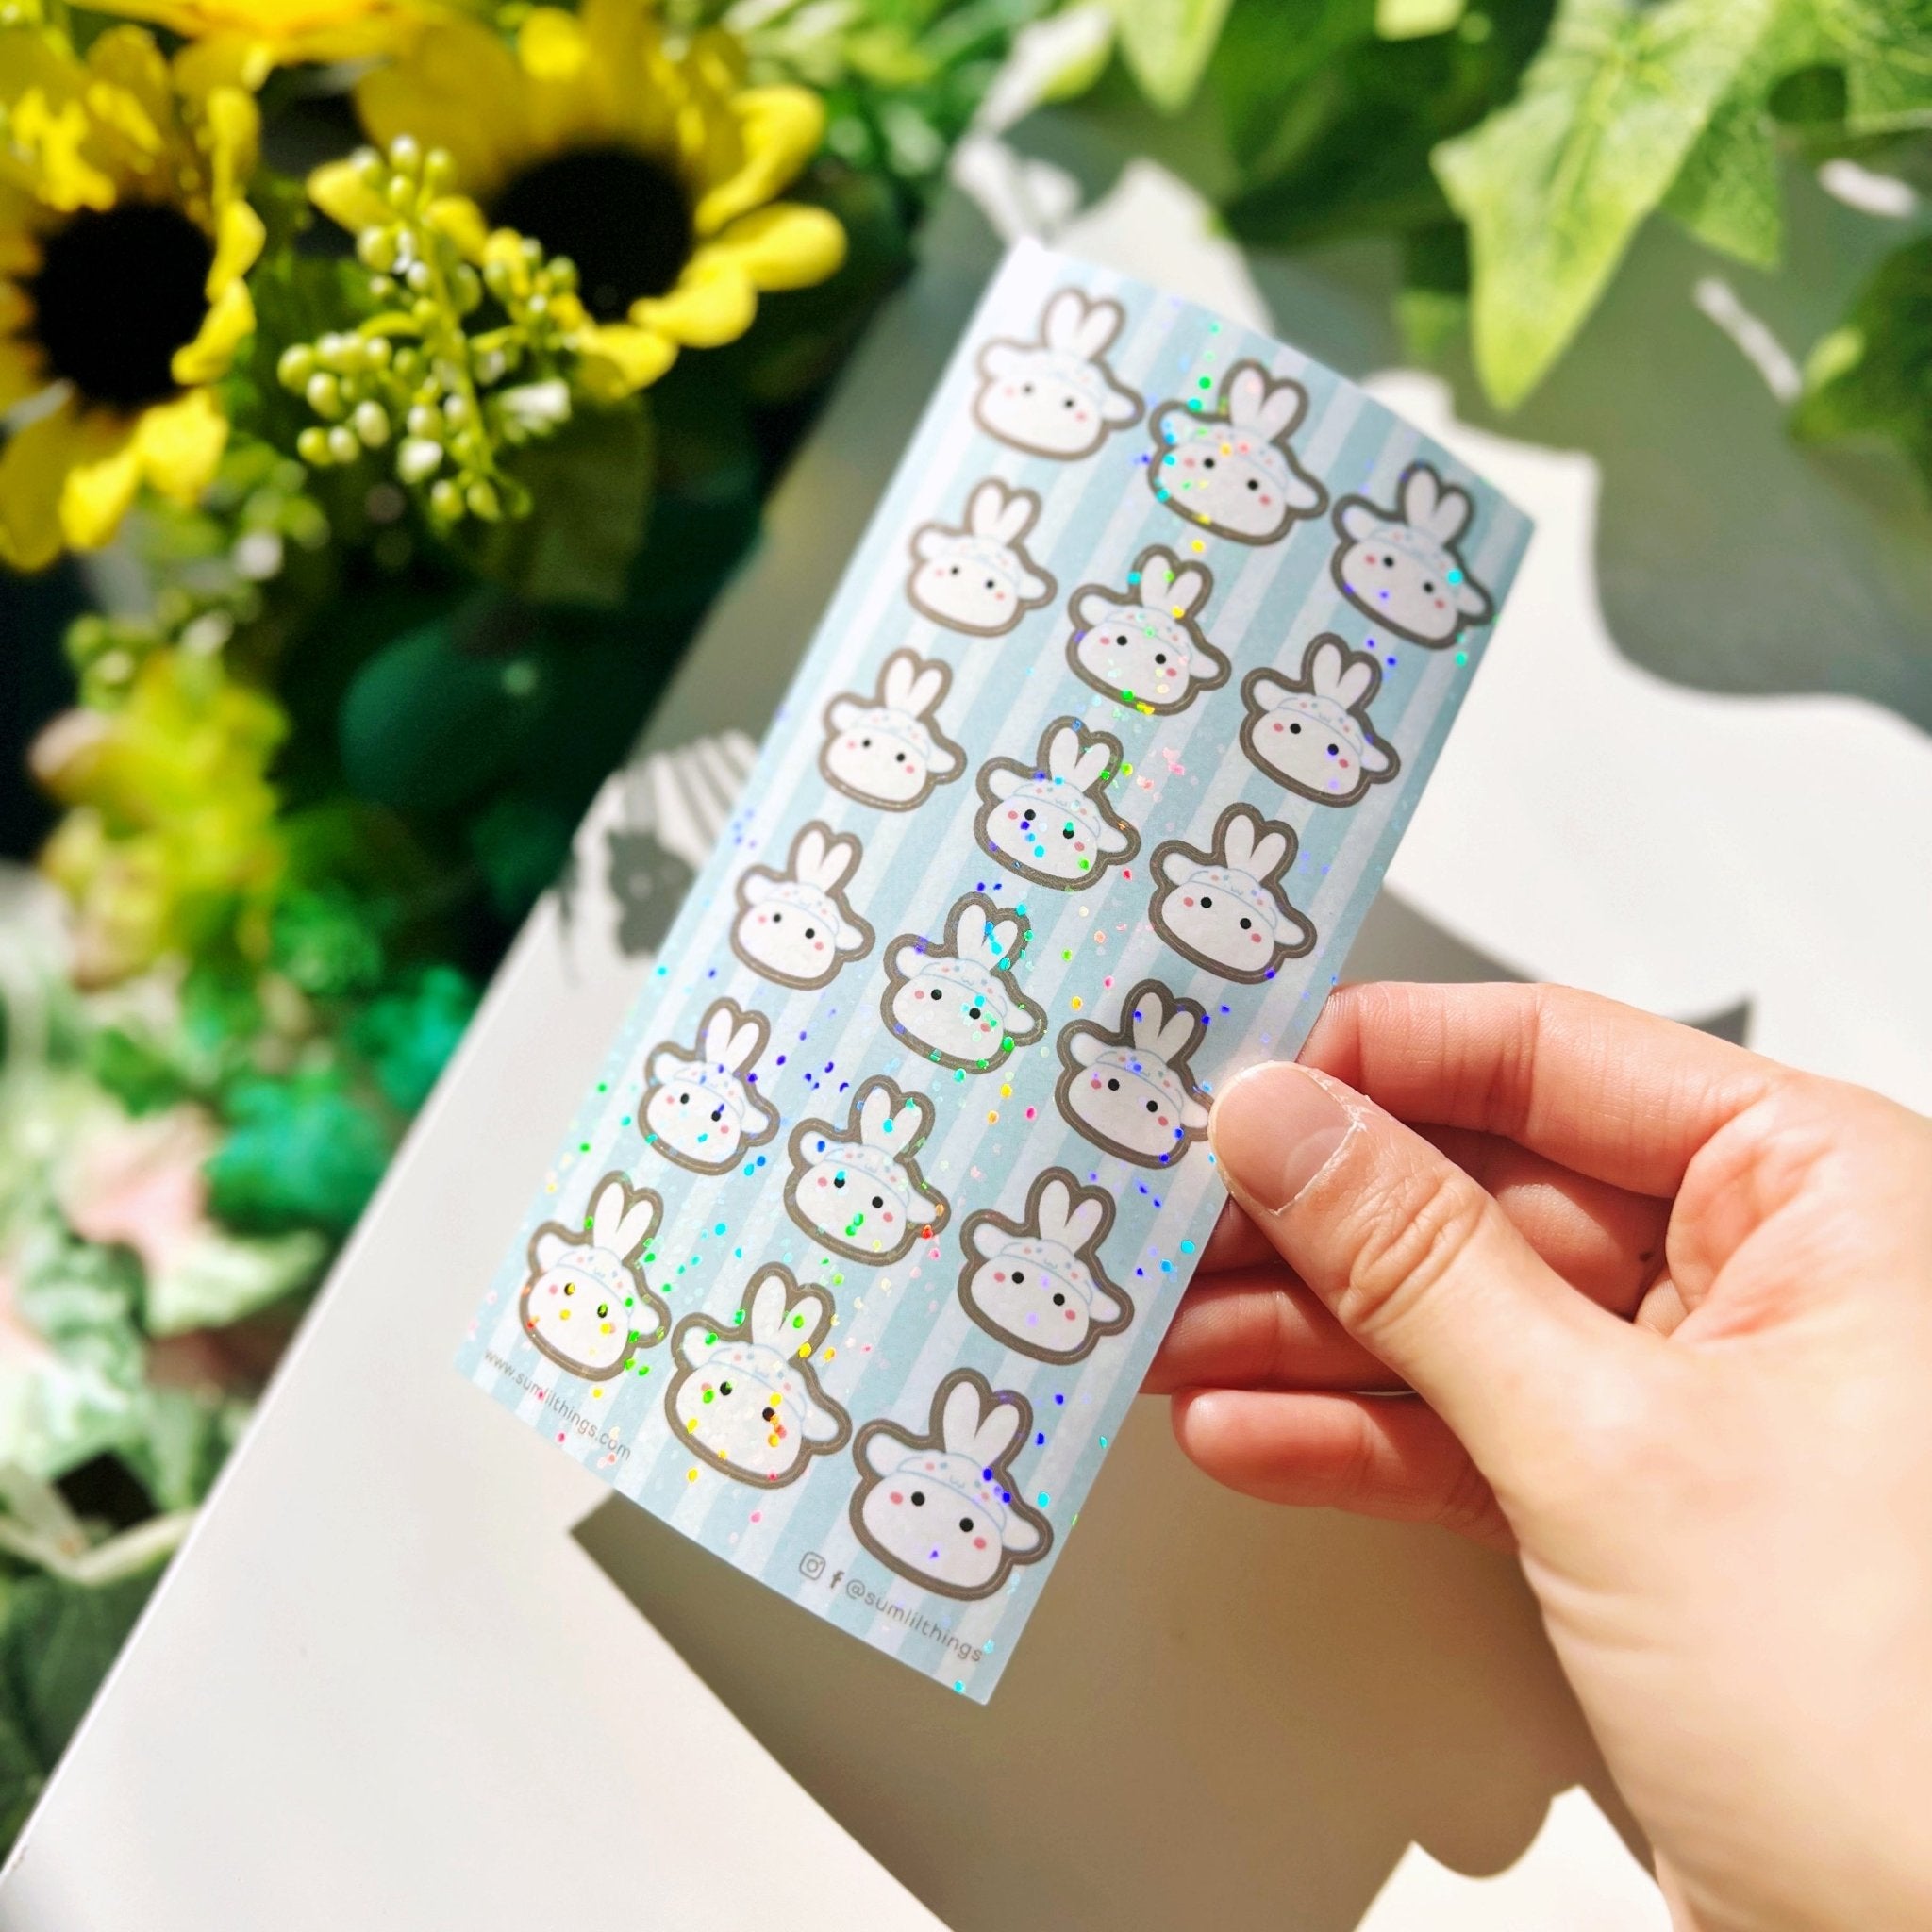 Seal Sticker - Cinnmoroll Lil - Holographic - SumLilThings